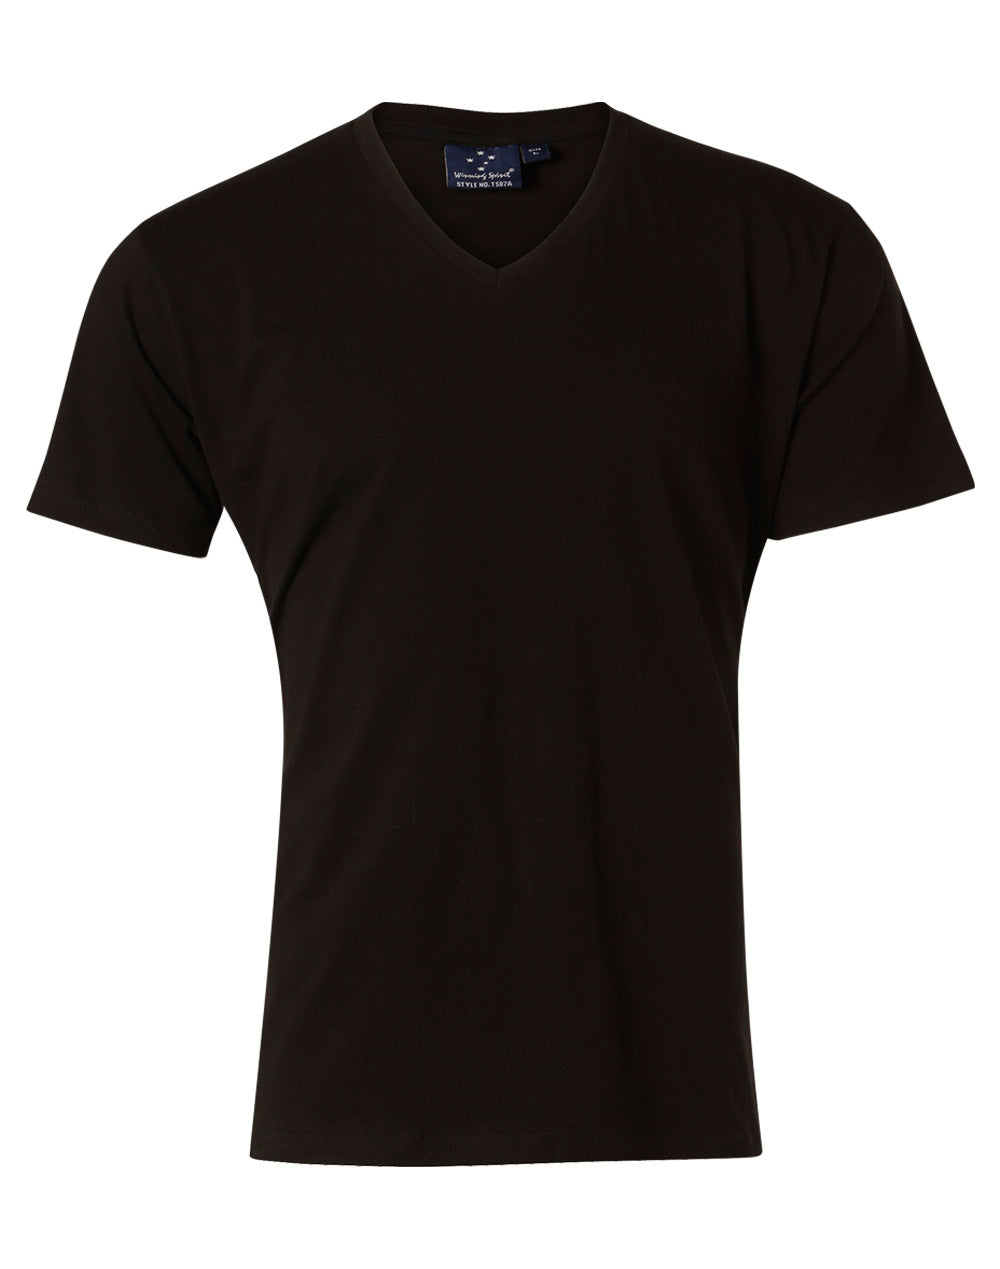 JCTS07A MEN'S V-NECK TEE